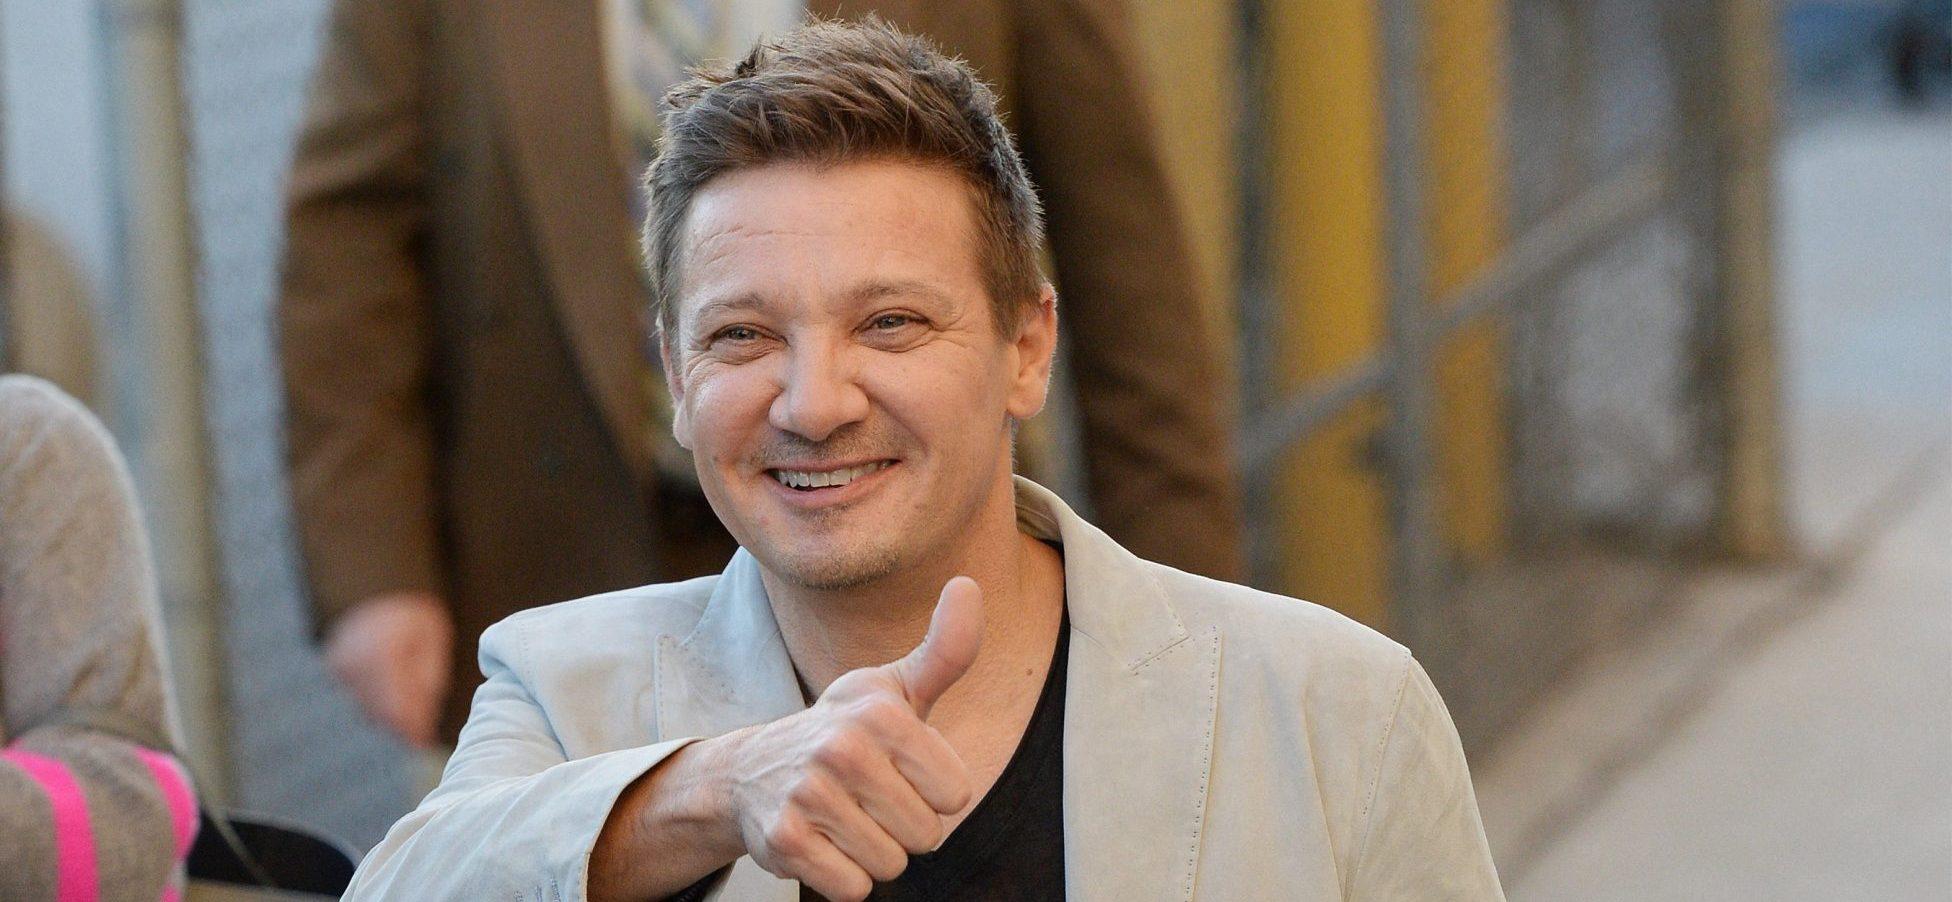 Listen To The Chilling 911 Call In Jeremy Renner’s First Interview Since Accident